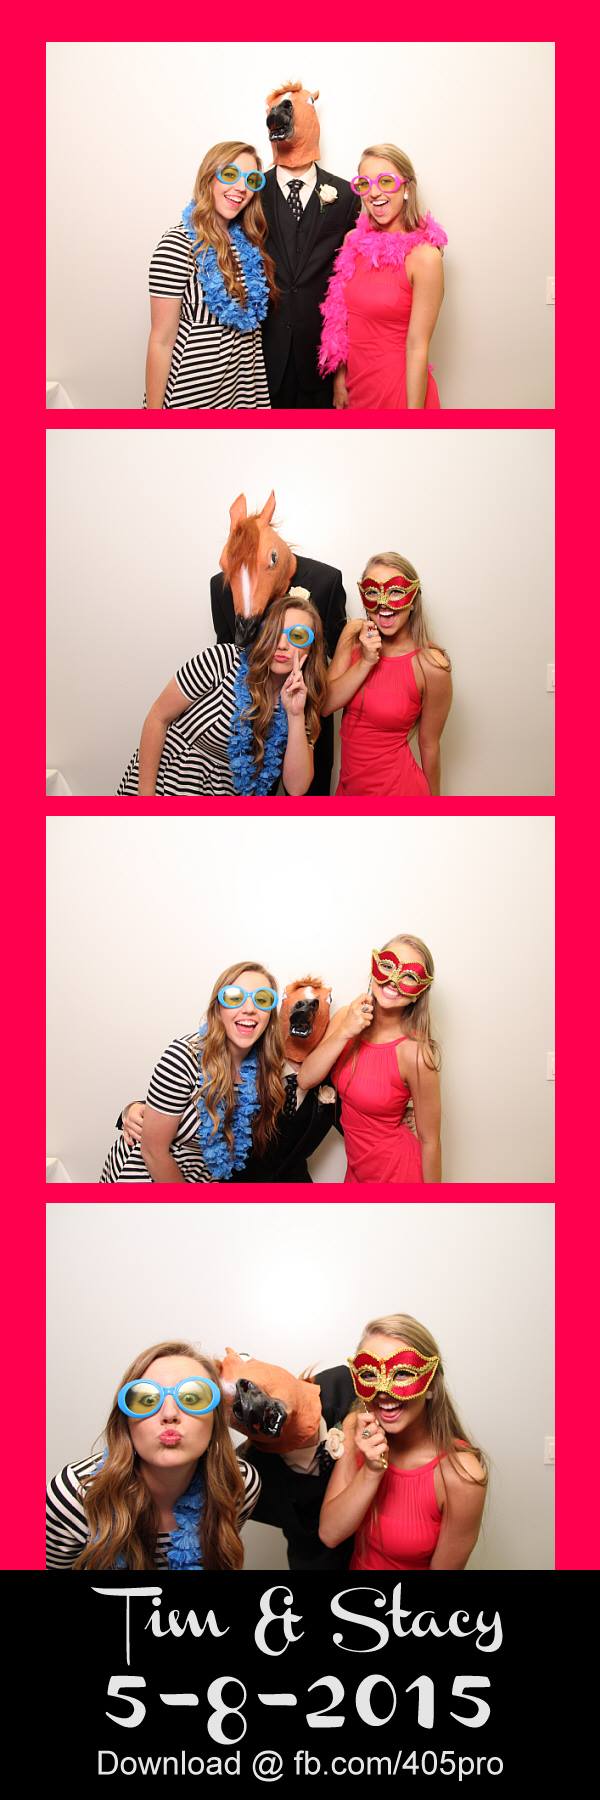 Oklahoma Midwest City Photo Booth Rentals Devon Boahouse